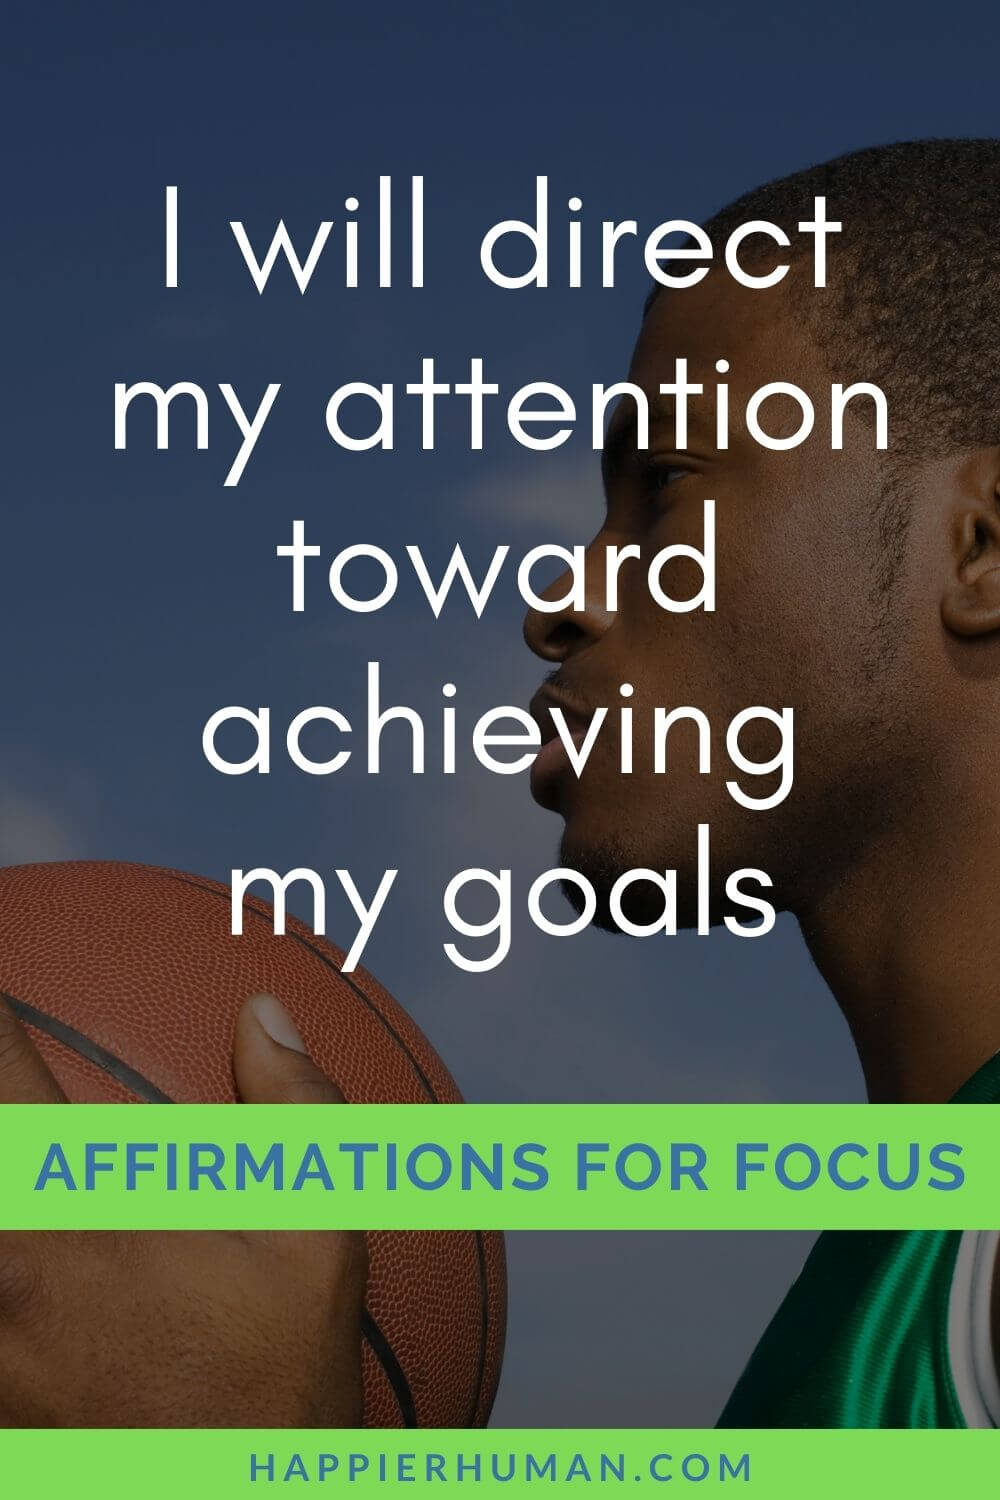 Affirmations for Focus - I will direct my attention toward achieving my goals | affirmations for achieving goals | affirmations to get attention | affirmations for distractions